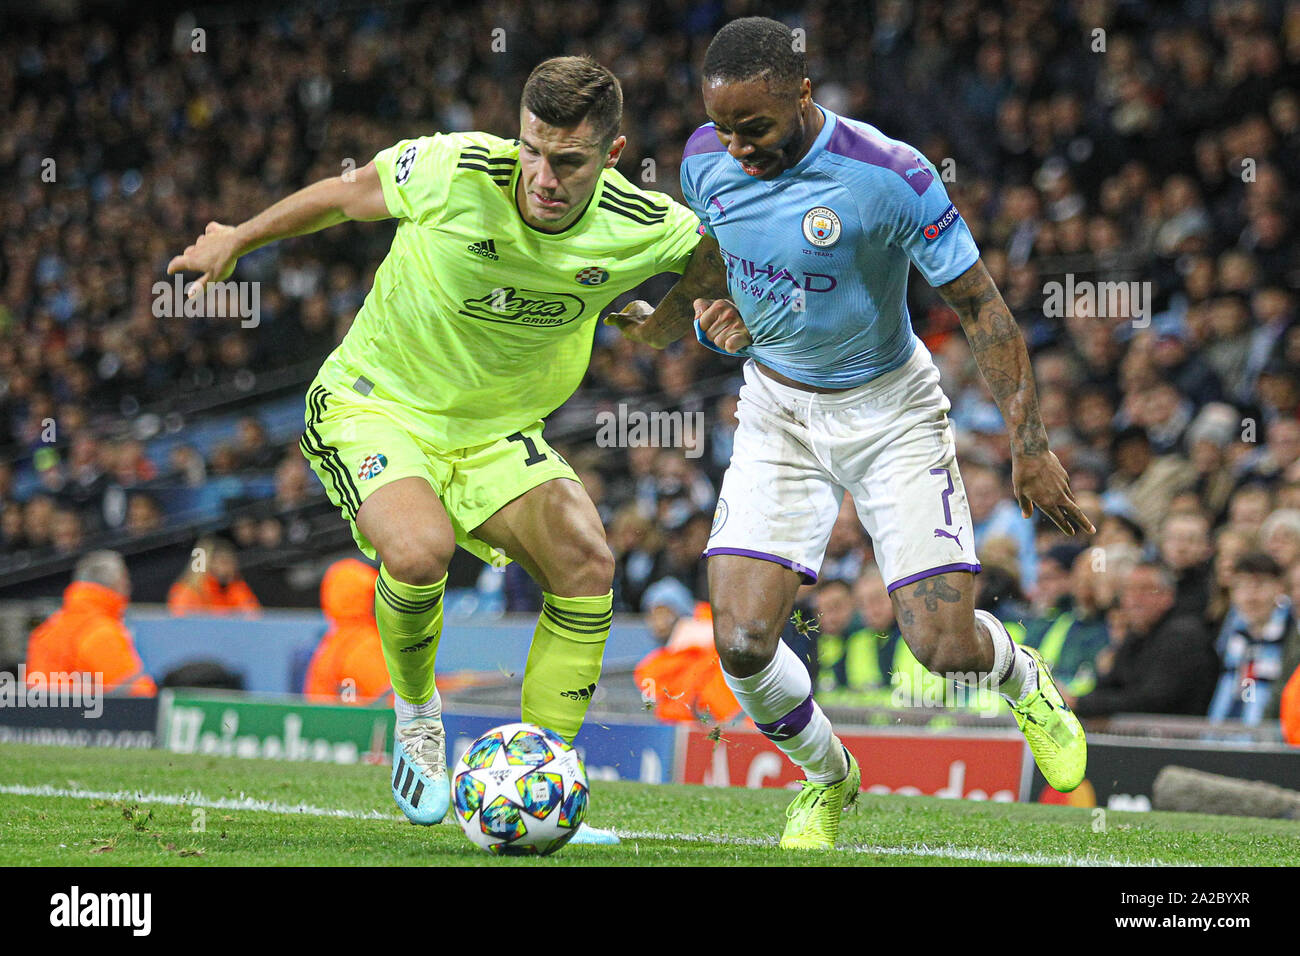 Raheem Sterling (Manchester City) during the UEFA Champions League group match between Manchester City and Dinamo Zagreb at the Etihad Stadium, Manchester, England on 1 October 2019. Photo by James  Gill. Stock Photo